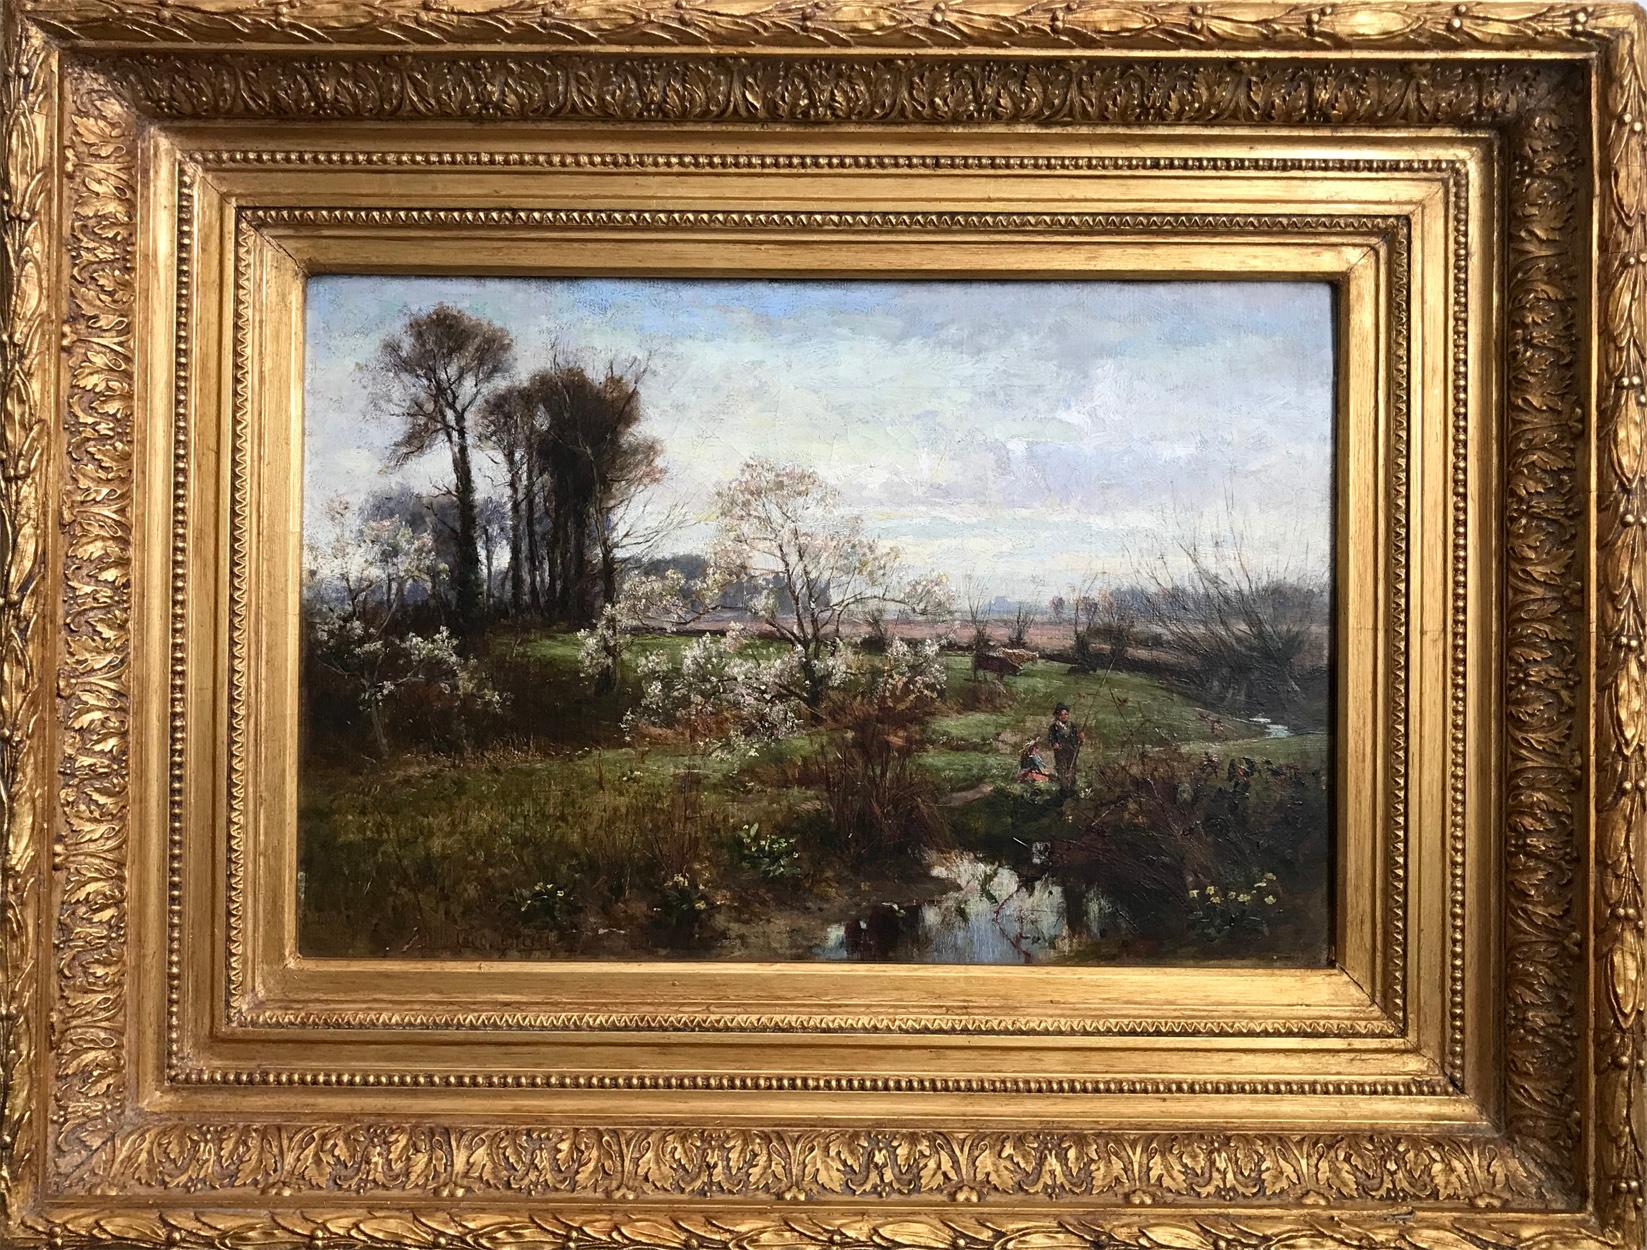 Oil on canvas signed lower left 'Geo Gray'.

A rustic spring country scene with a young couple fishing on the banks of a small brook. The river bank with daffodils and blossom trees, with far reaching views across a meadow with cows and ploughed